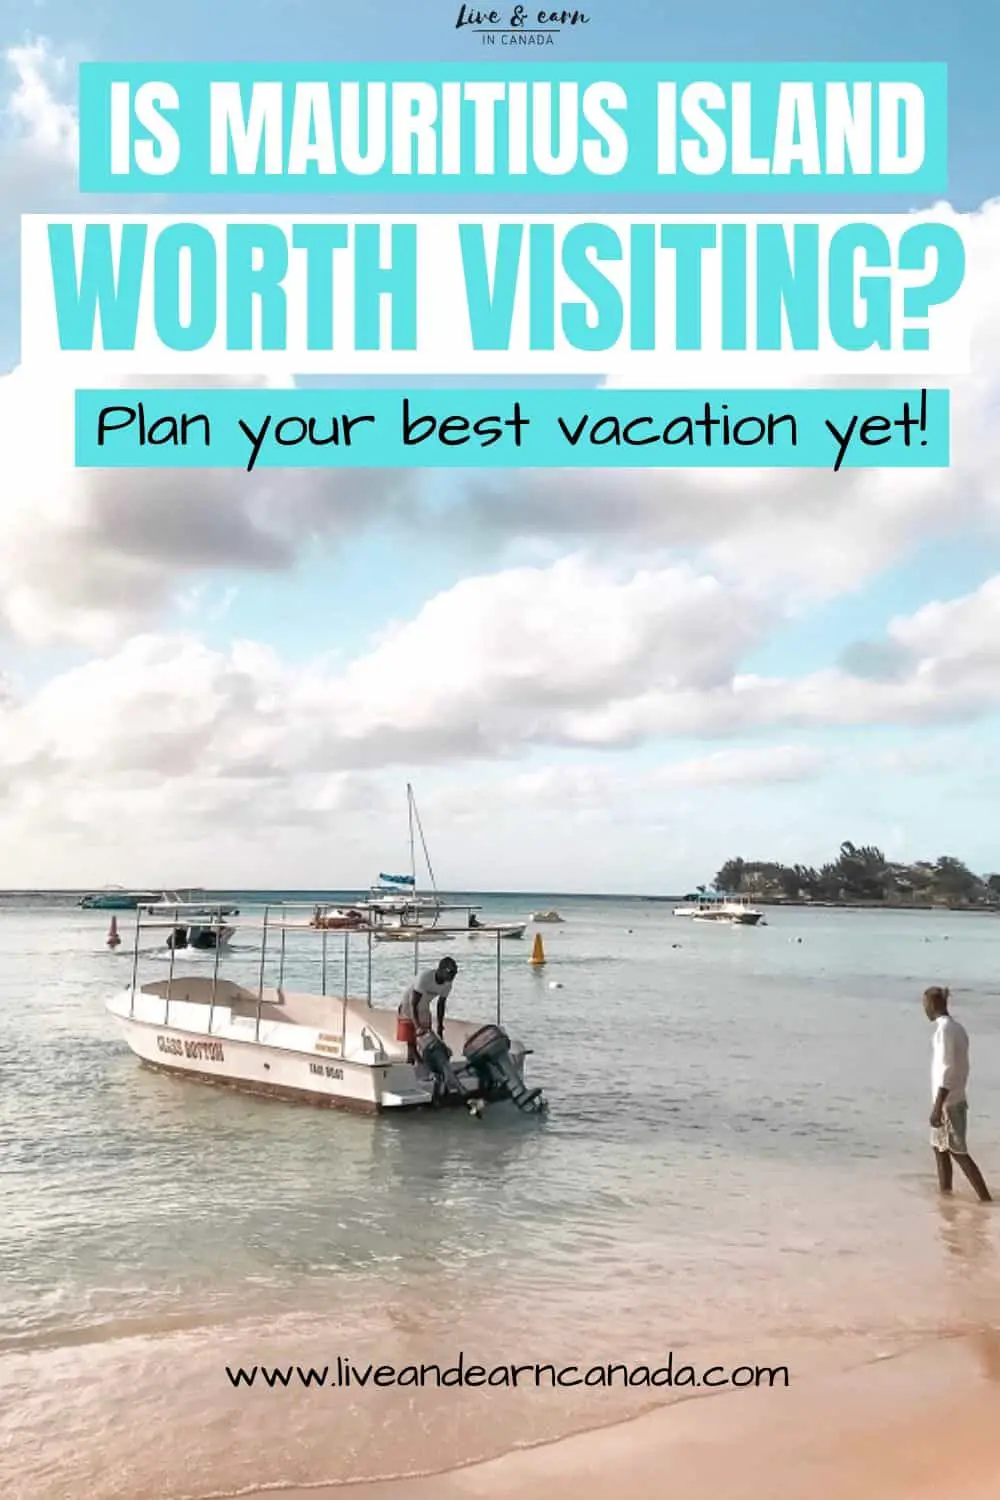 Thinking of visiting Mauritius? Here are 7 amazing reasons why you should consider visiting Mauritius this year. Plan your best trip to Mauritius right now. Learn the best time and all the travel tips you need to visit Mauritius #mauritiusisland #africa #mauritiustravel #islanddestination #mauritius